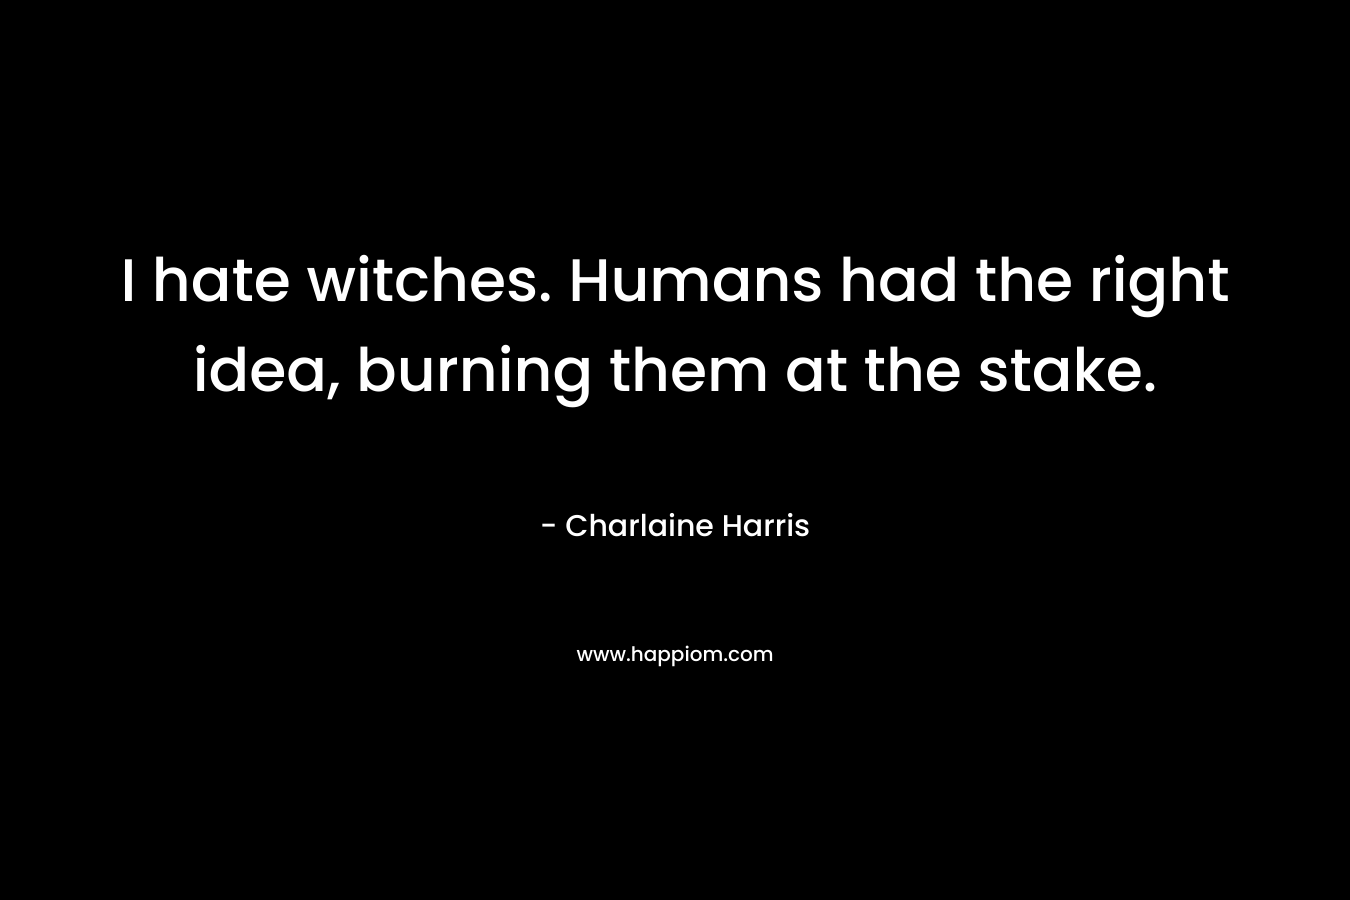 I hate witches. Humans had the right idea, burning them at the stake.